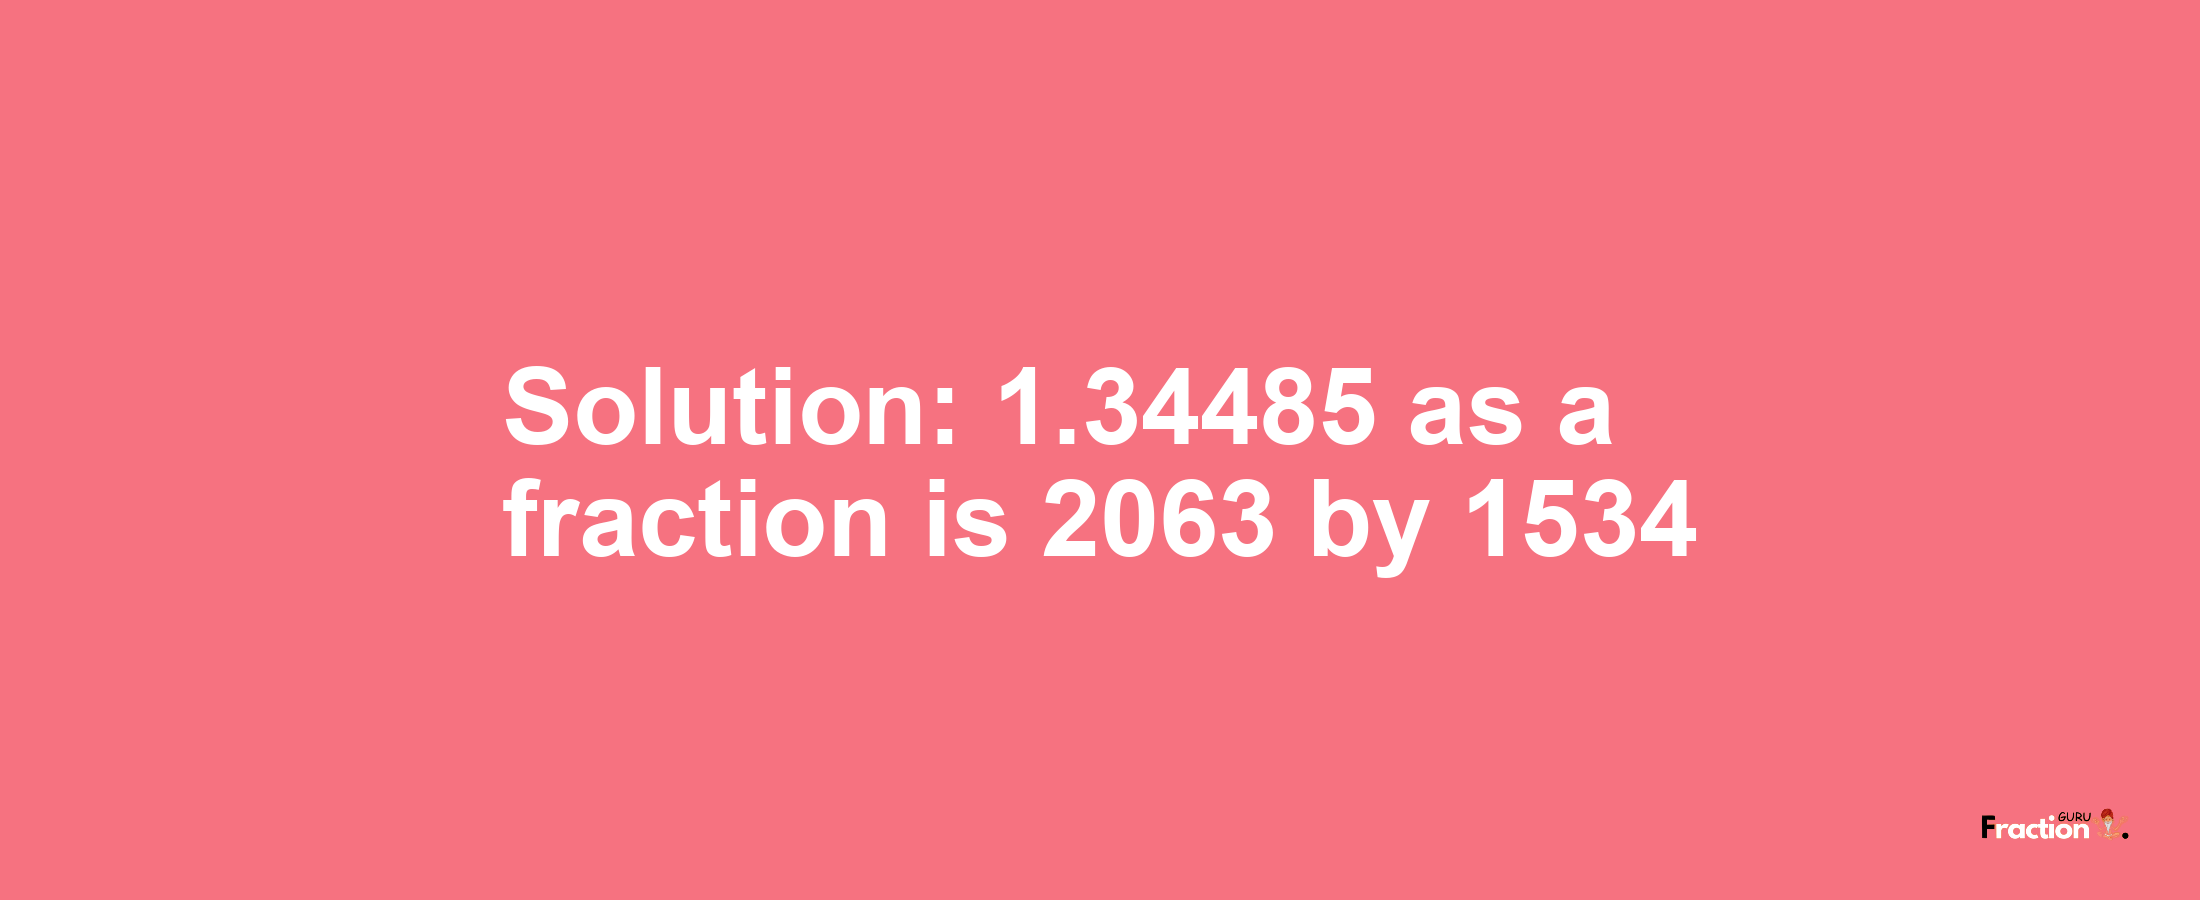 Solution:1.34485 as a fraction is 2063/1534